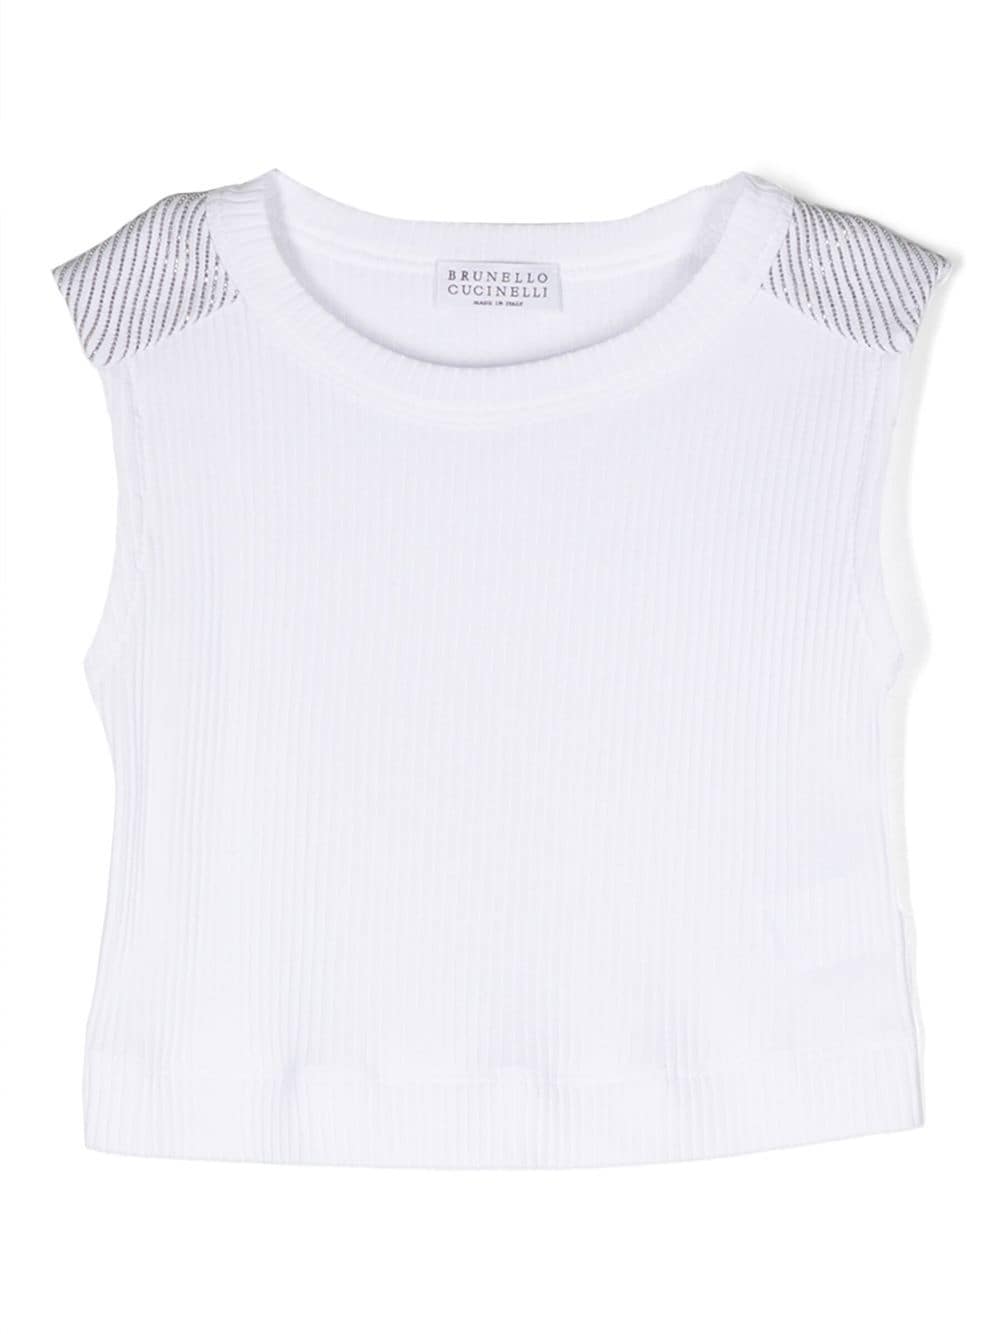 Brunello Cucinelli Kids crystal-detail ribbed top - White von Brunello Cucinelli Kids